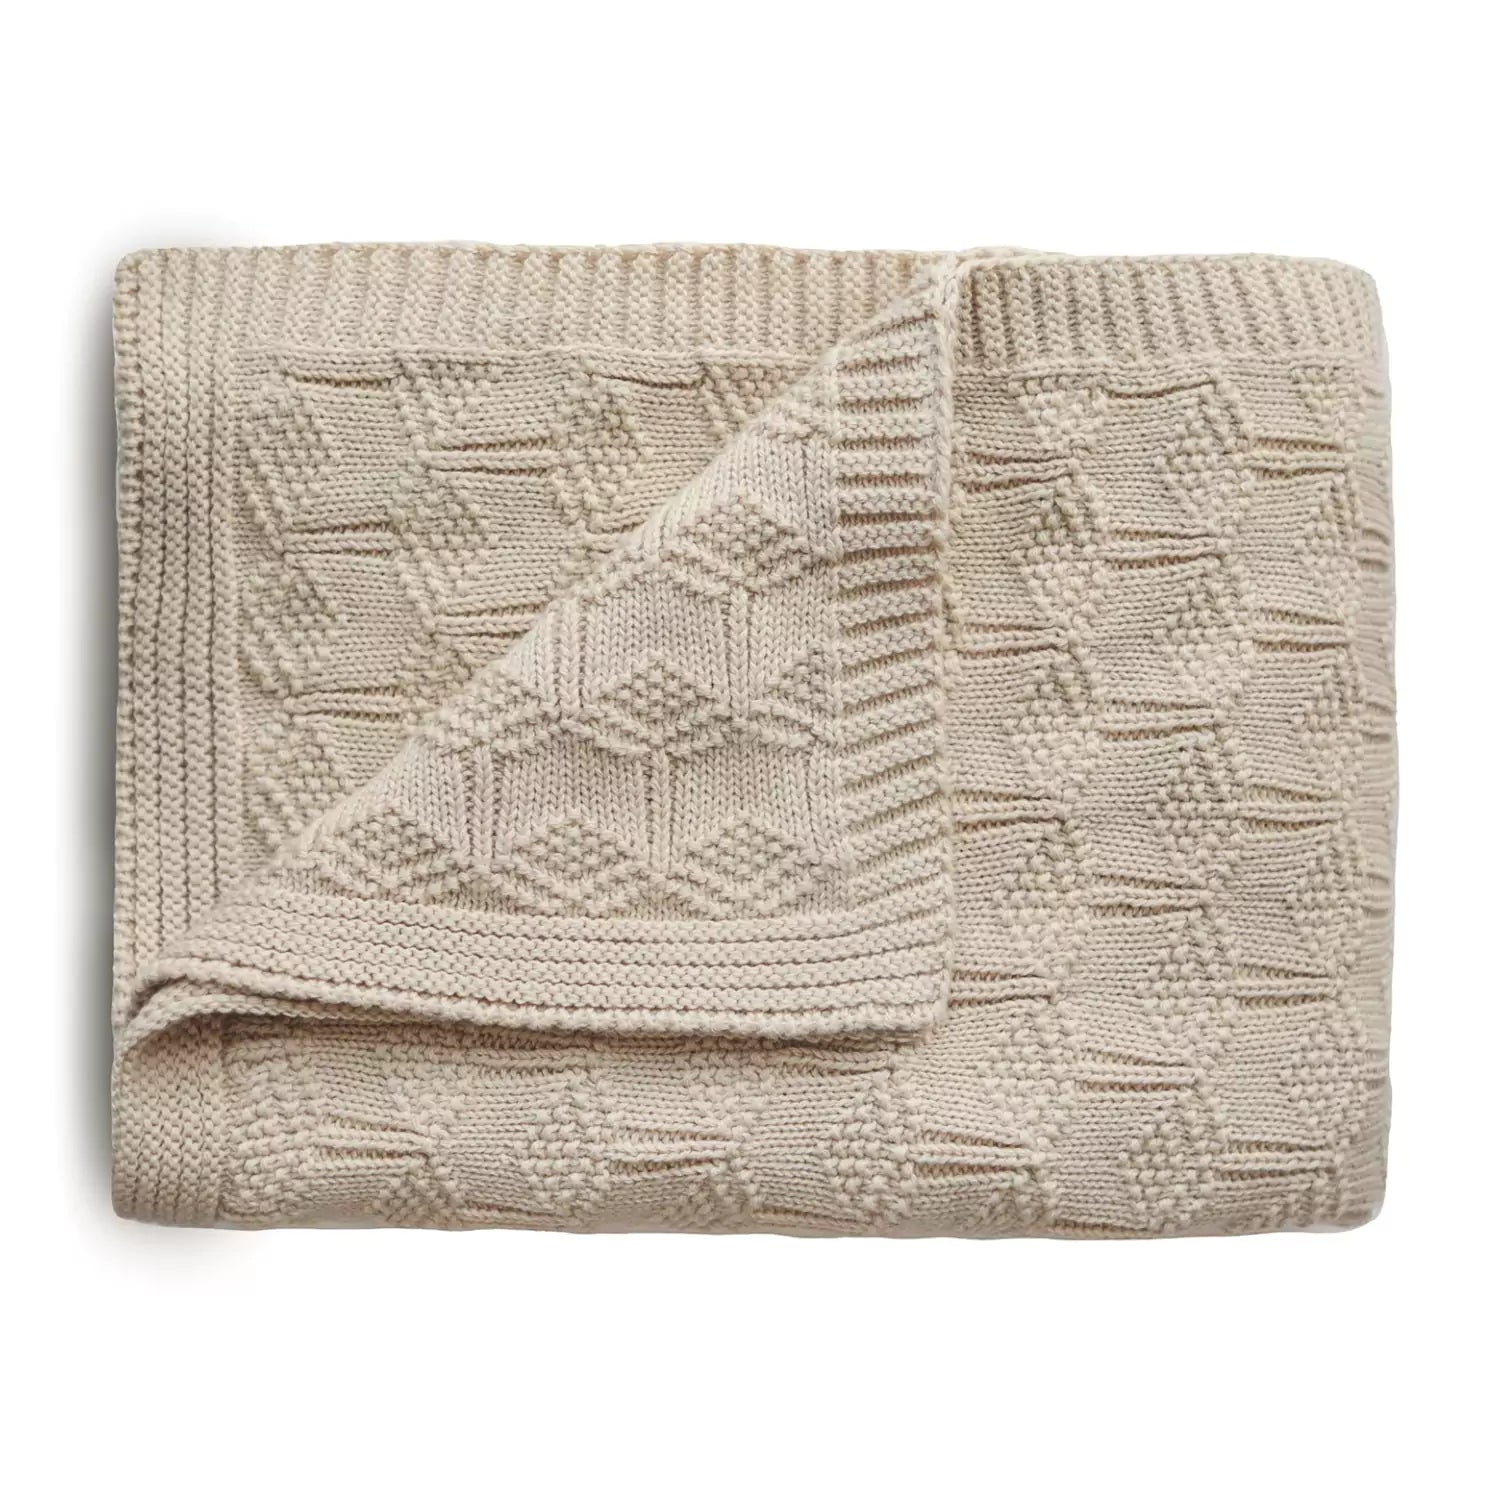 An image of Organic Knitted Baby Blanket: Perfect Gift for Any Newborn Beige